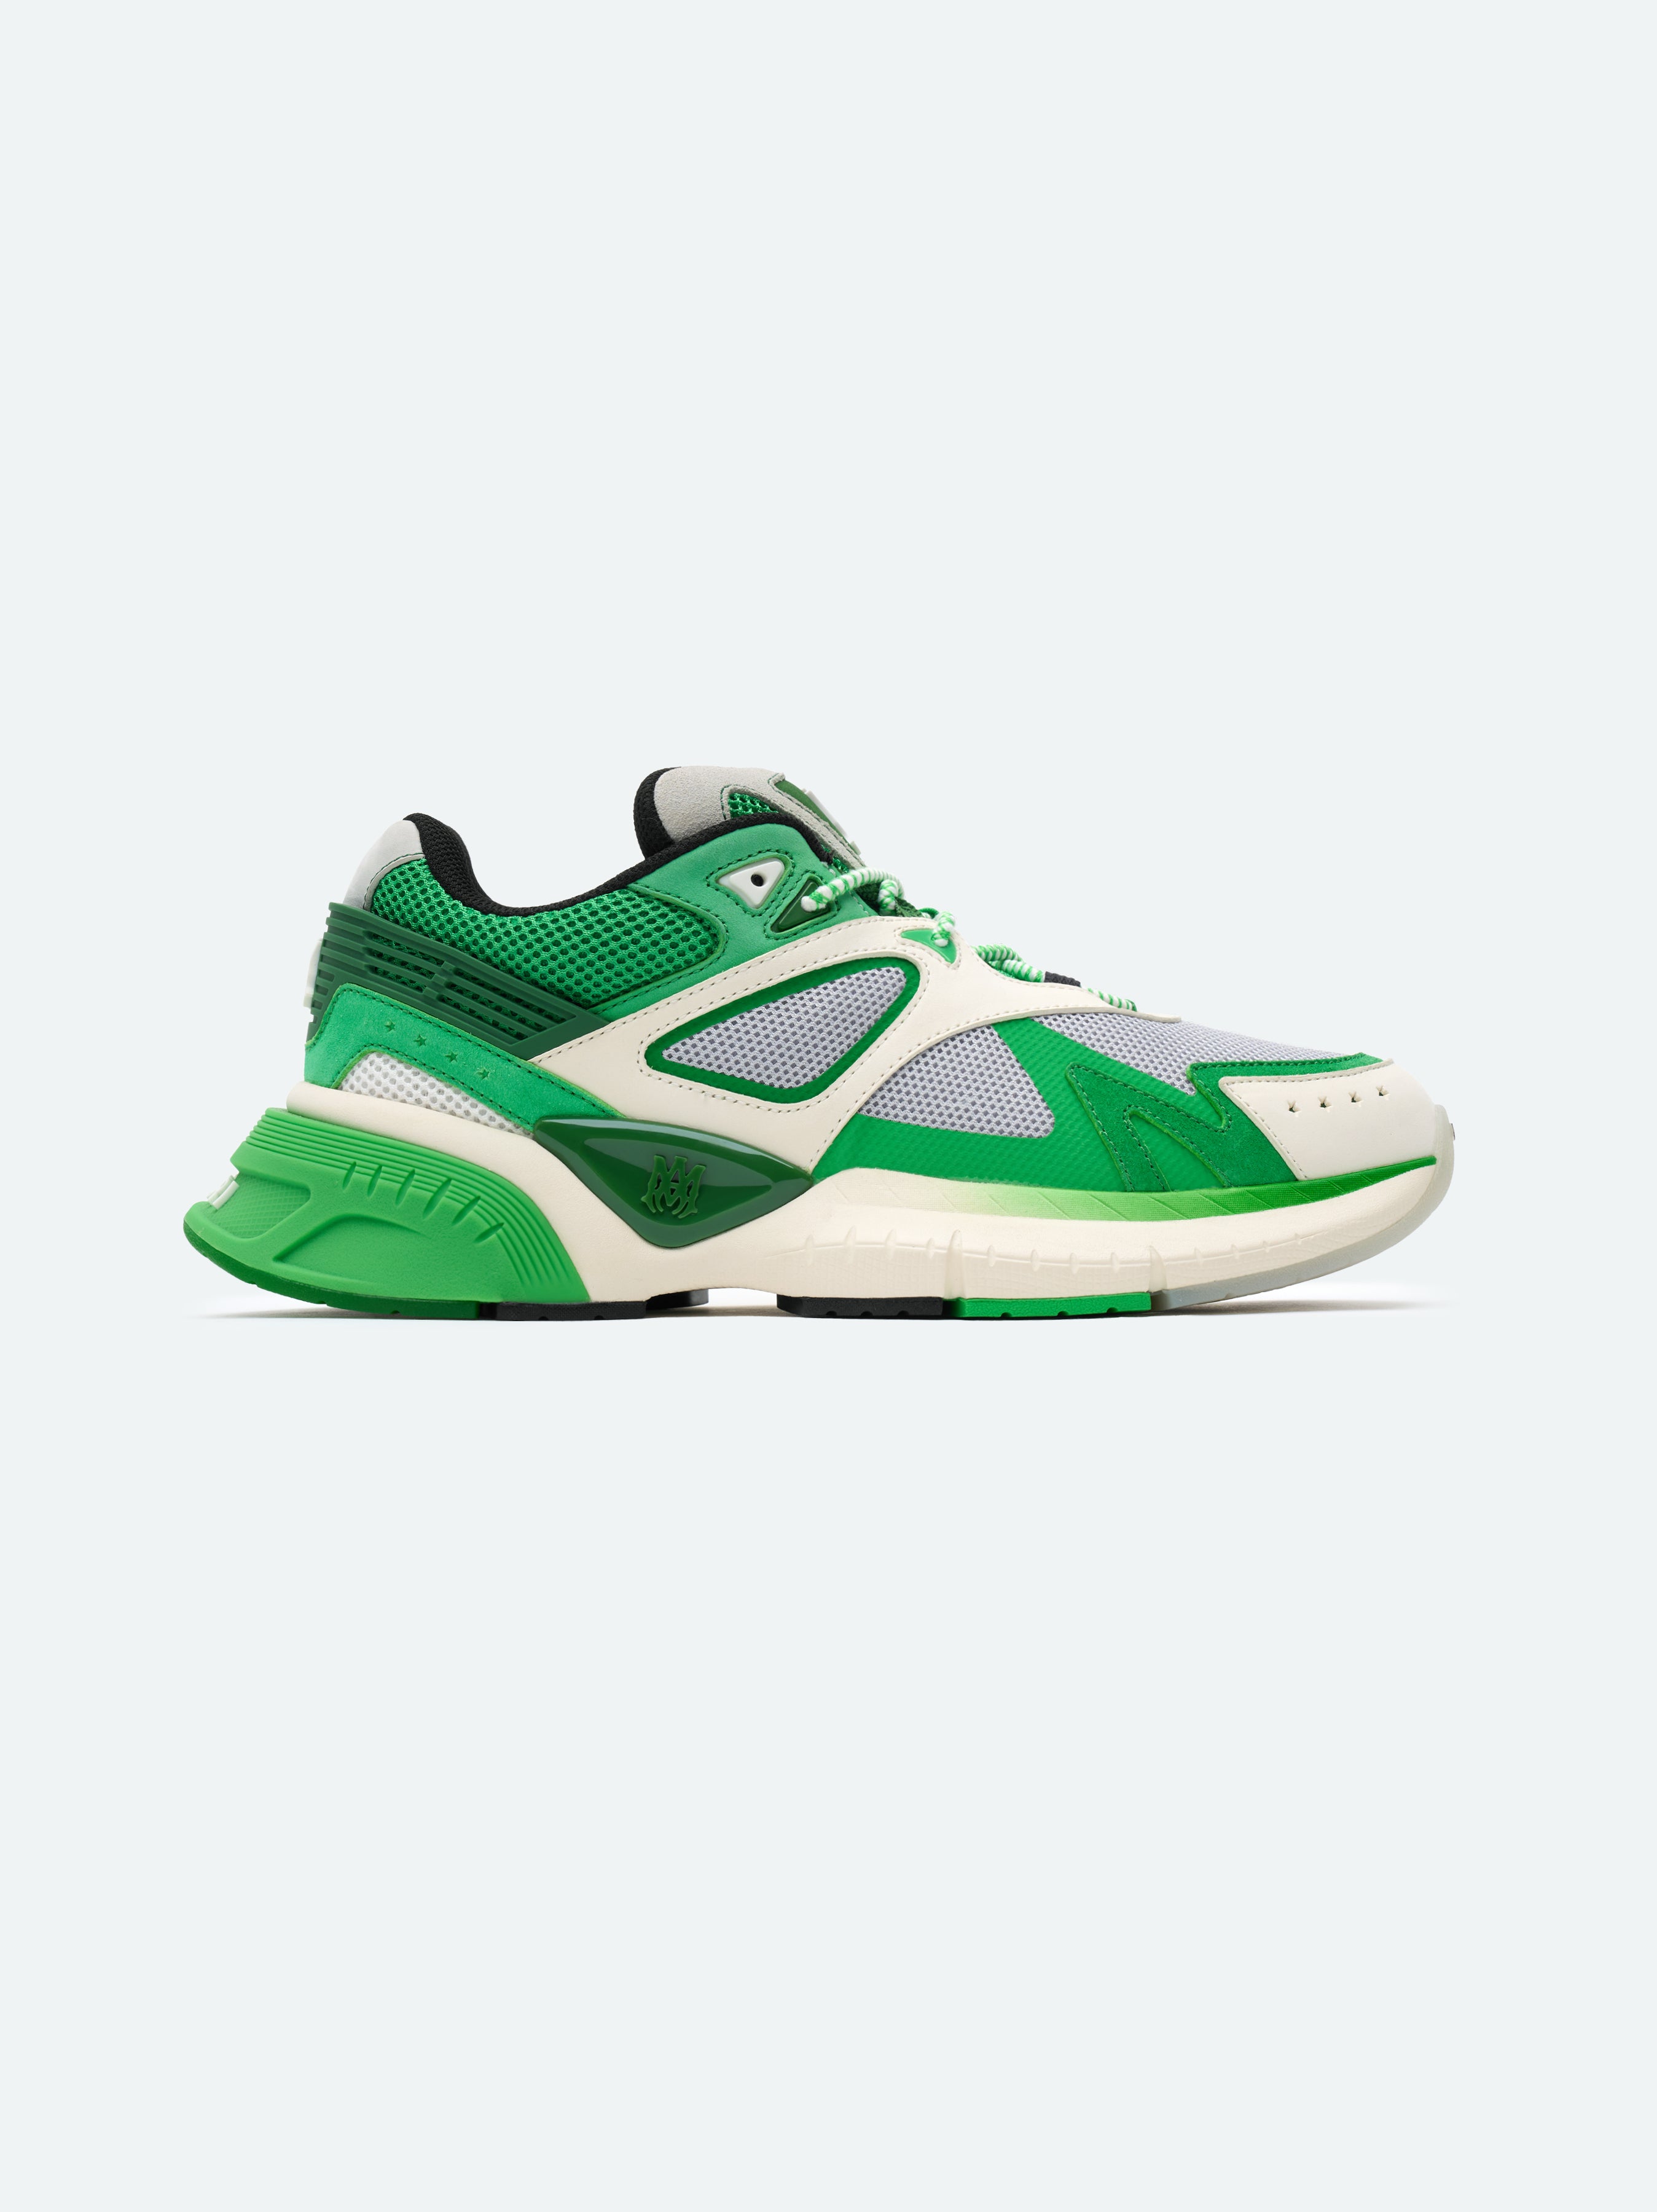 Product WOMEN - MA RUNNER - Green featured image